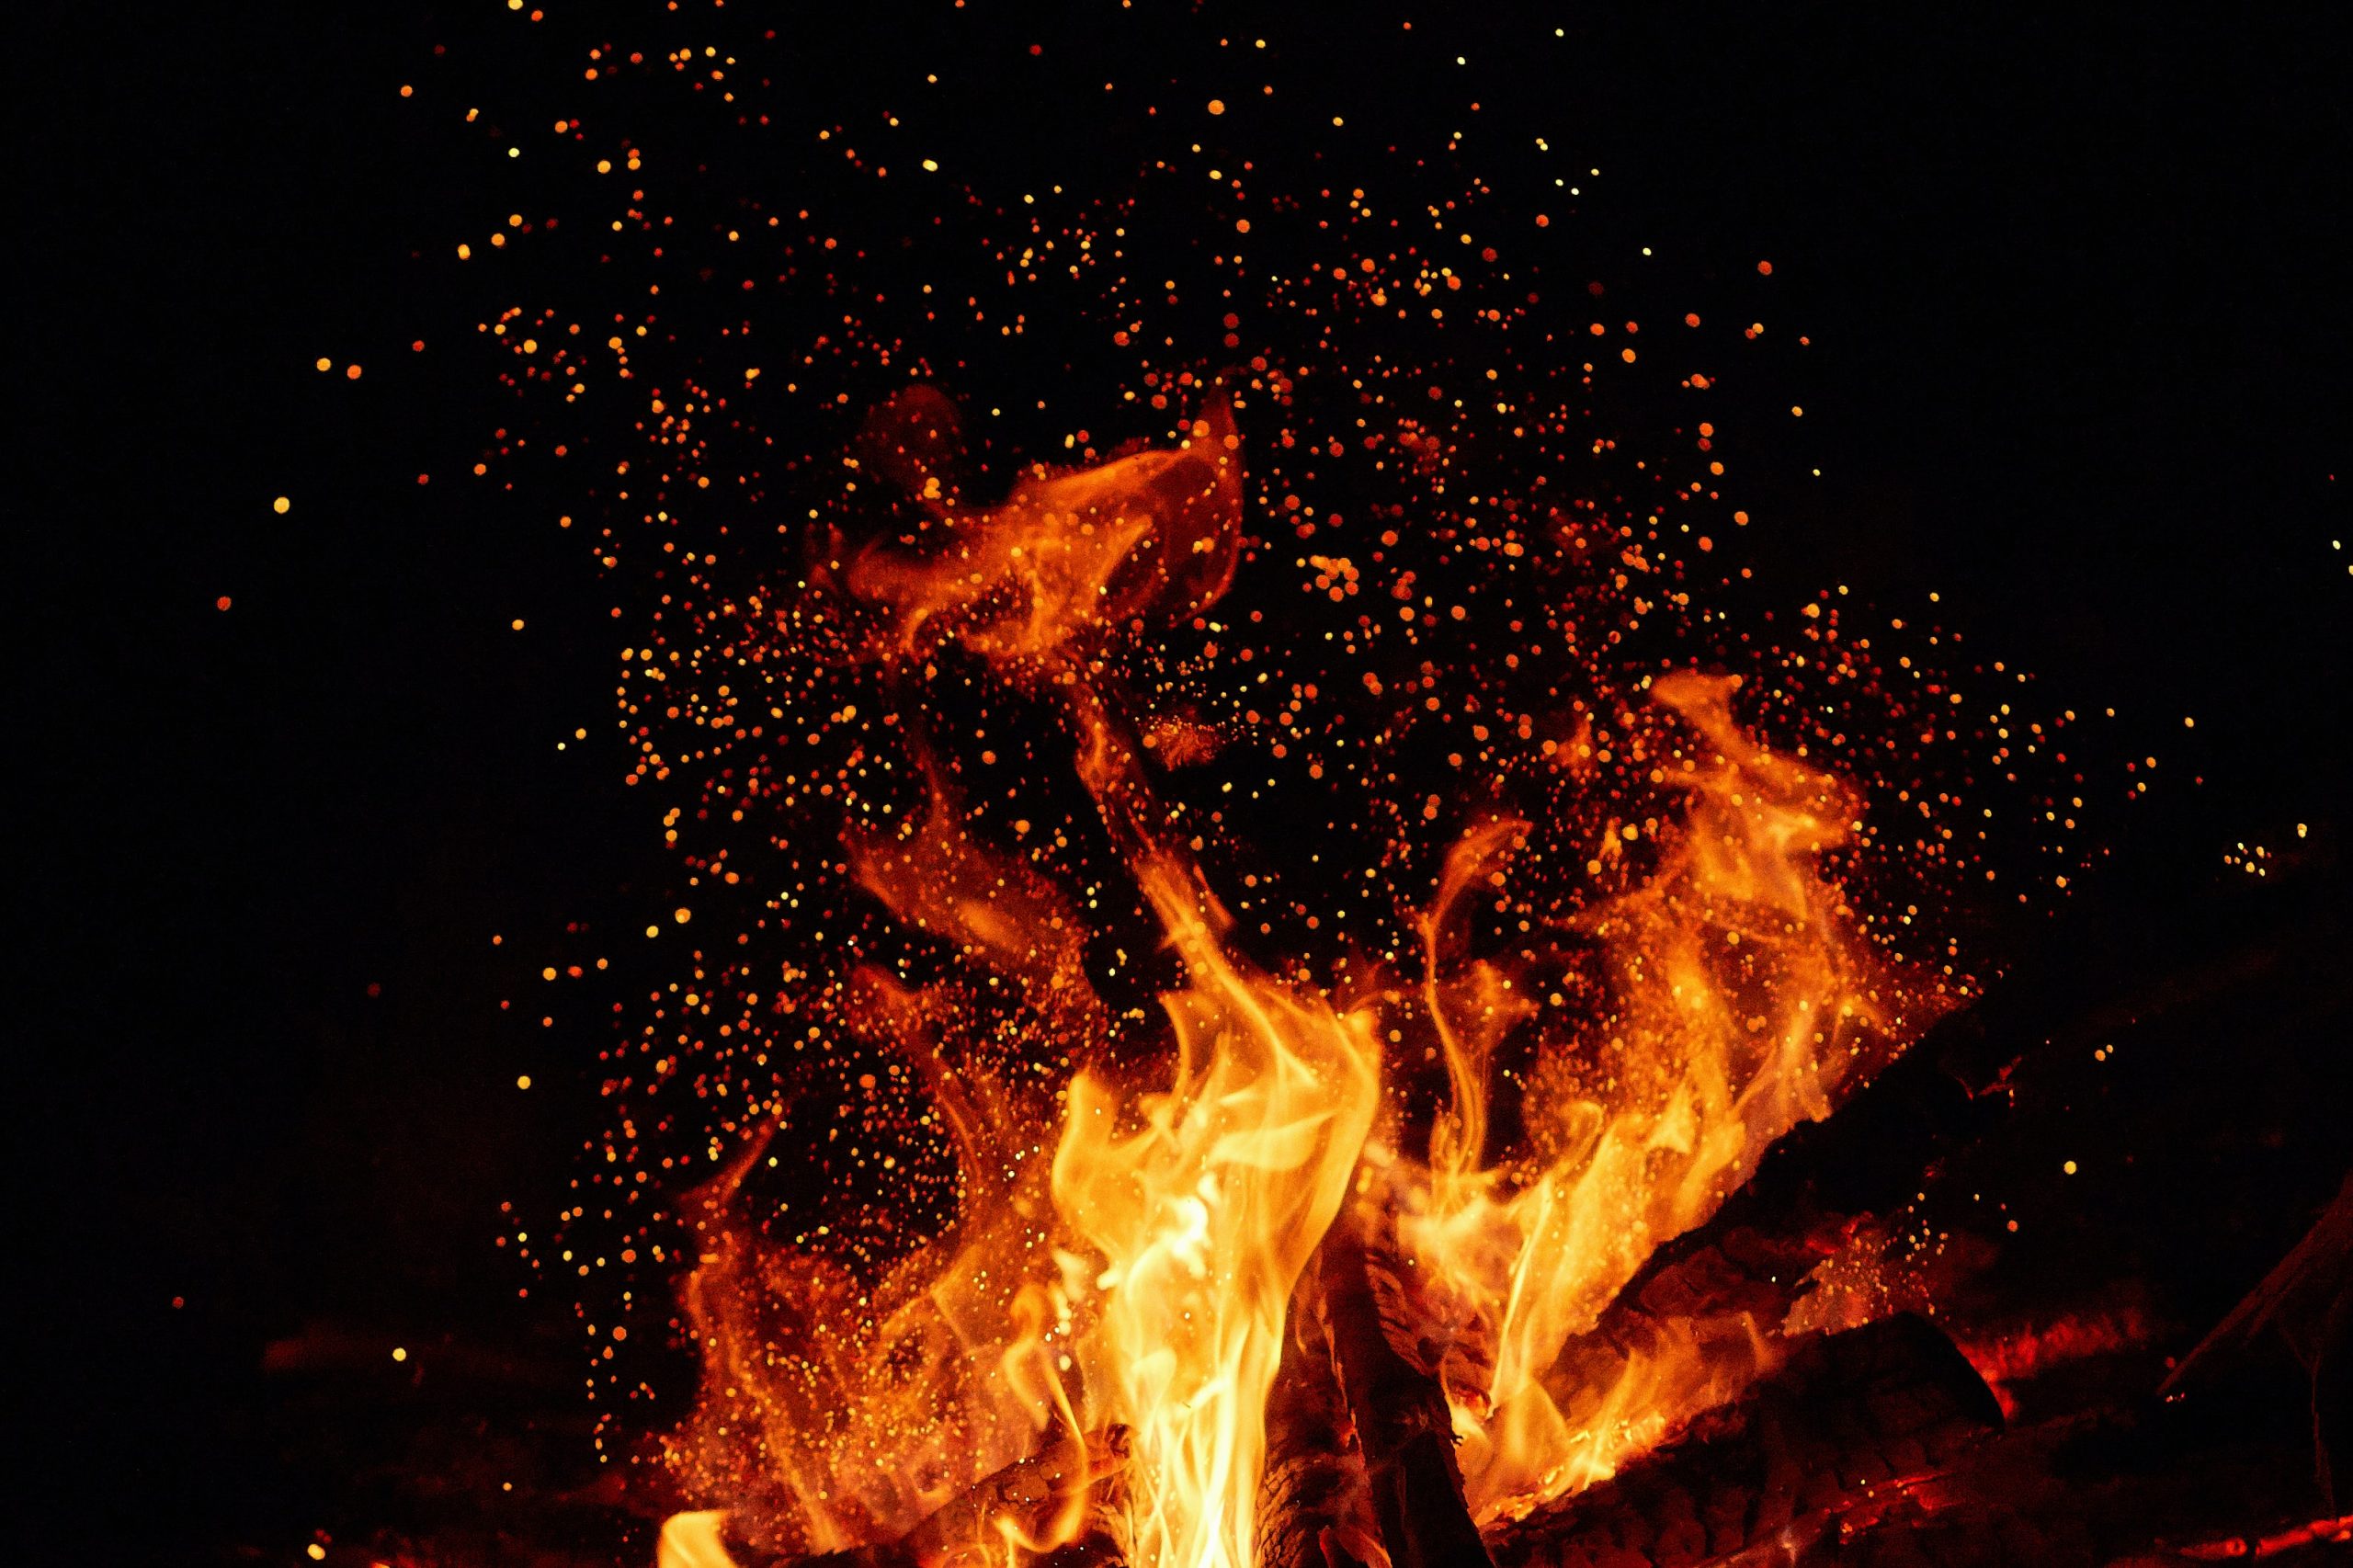 Night photo of a bonfire with sparks. Bright flame against a dark background. High resolution photo of a bonfire.